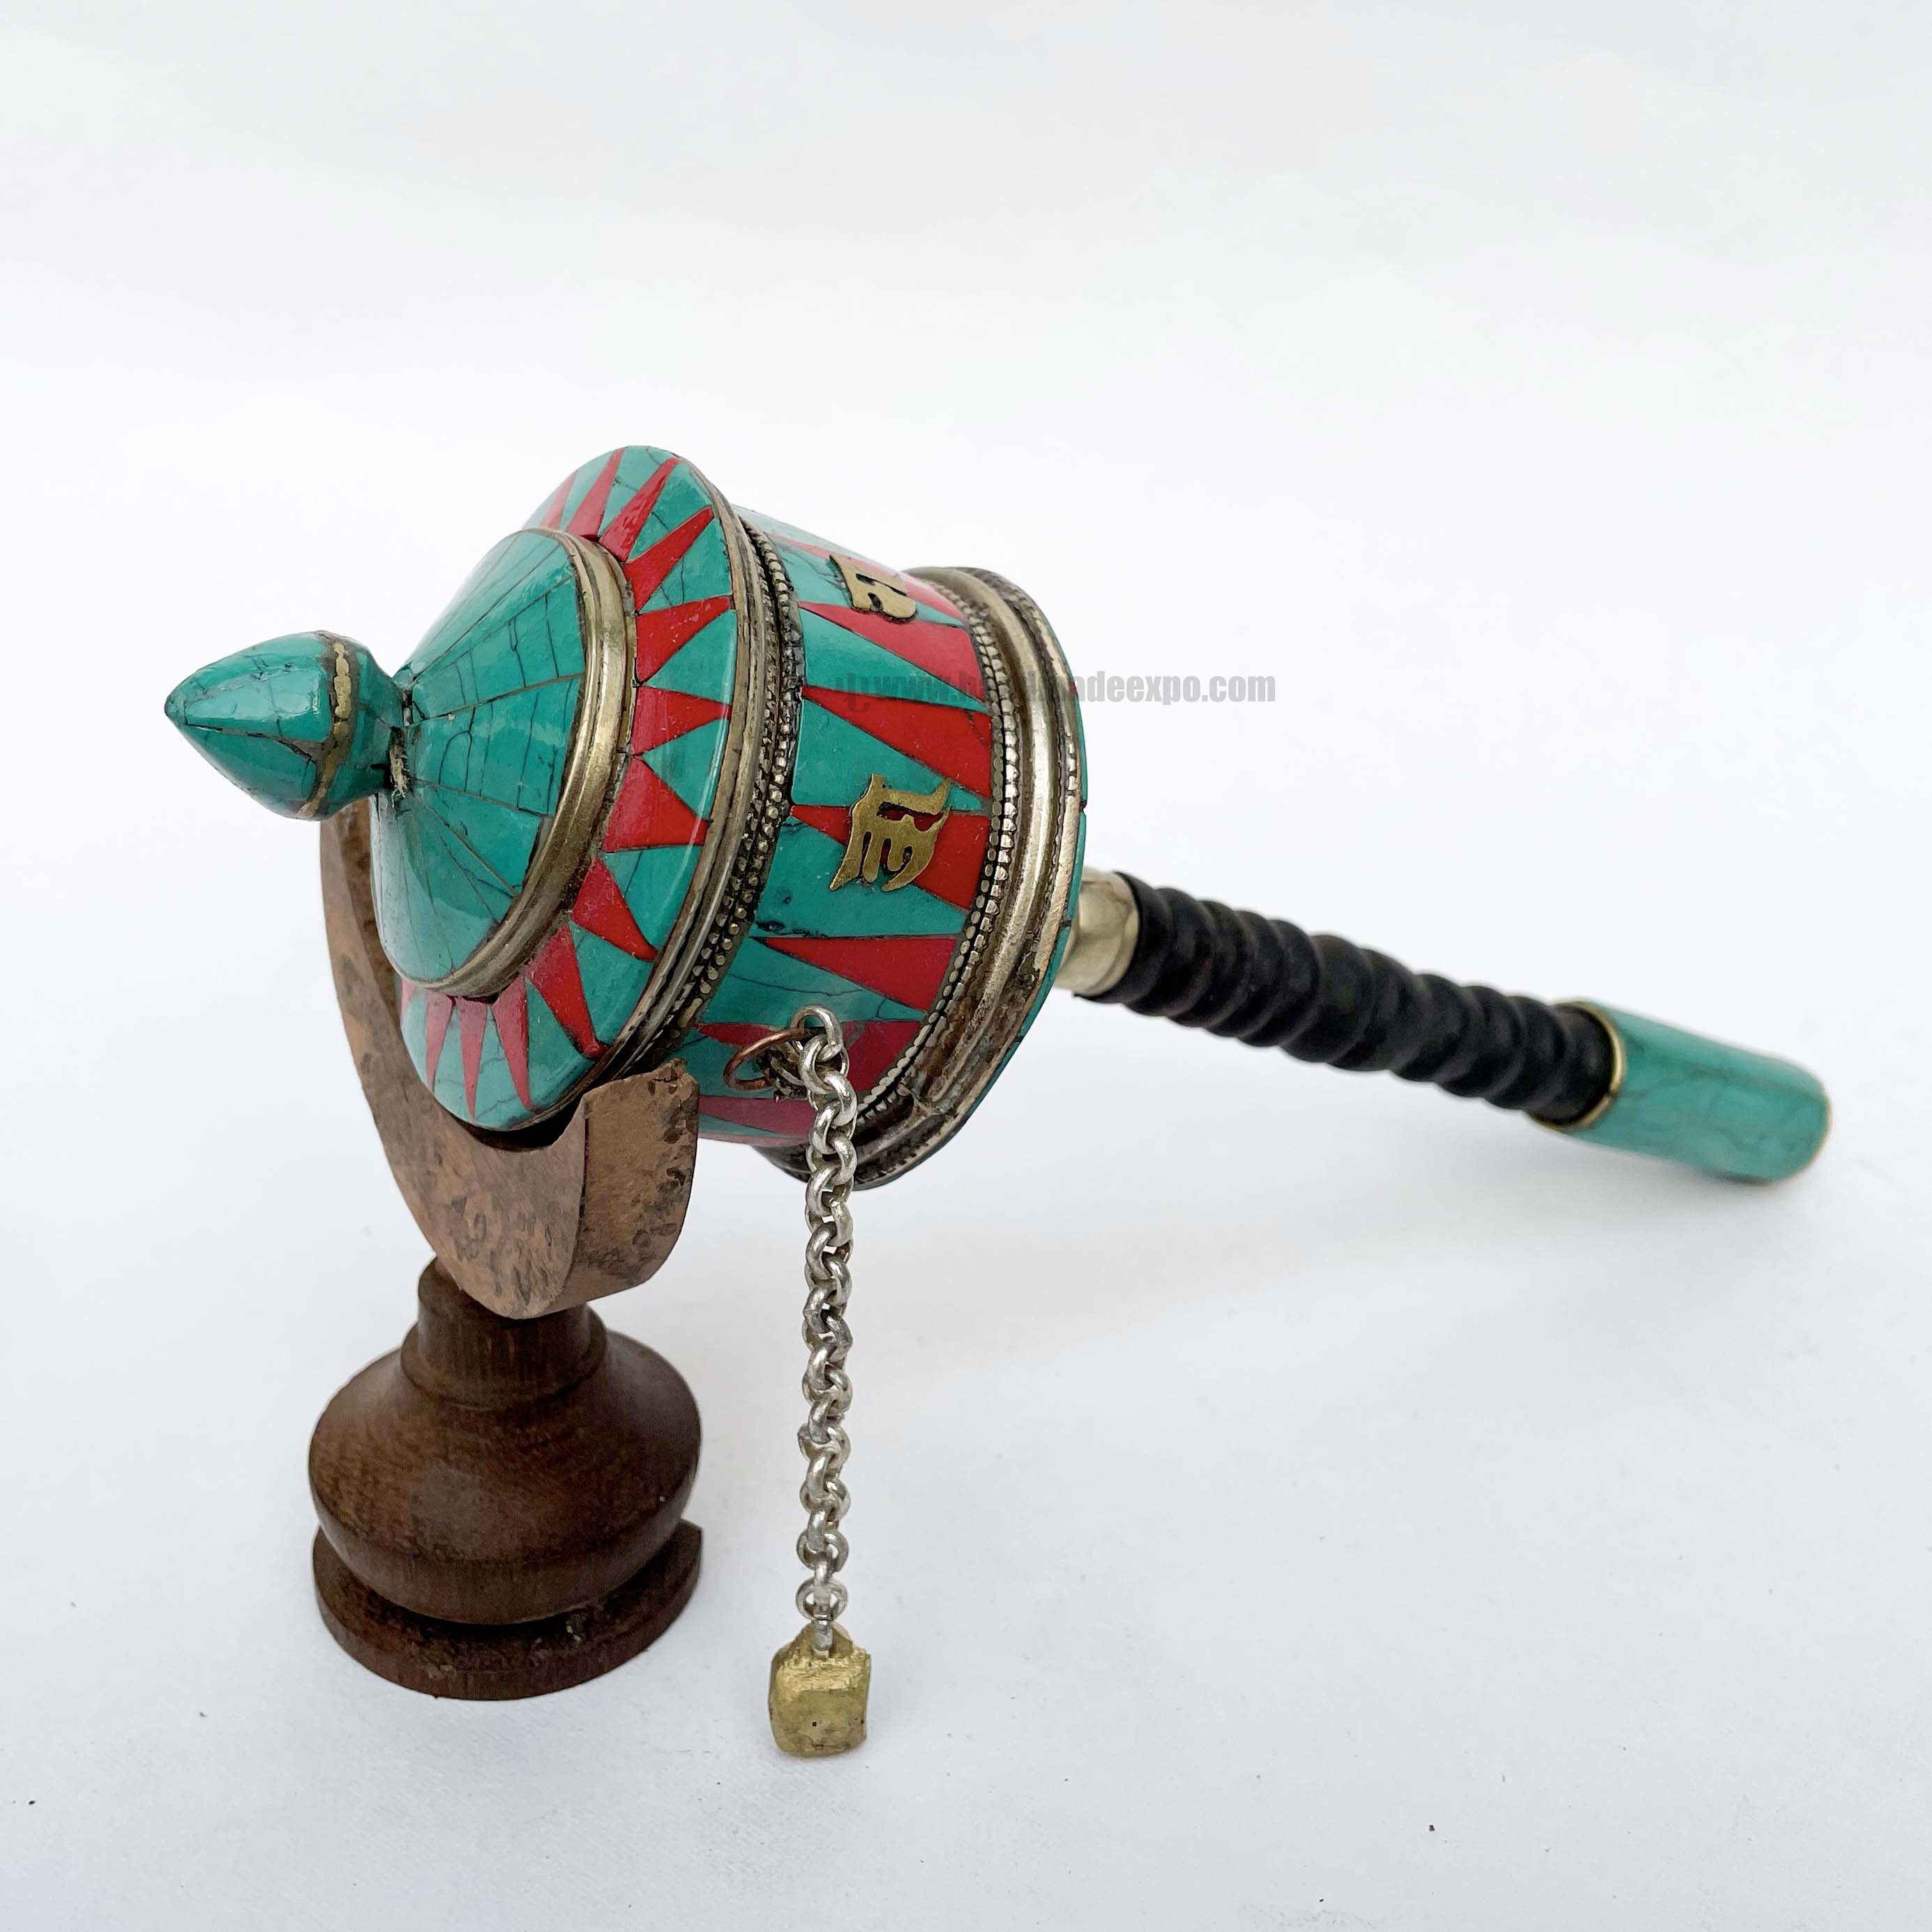 Brass Hand Held With Mantra Prayer Wheel, stone Setting, Blue And Red Color